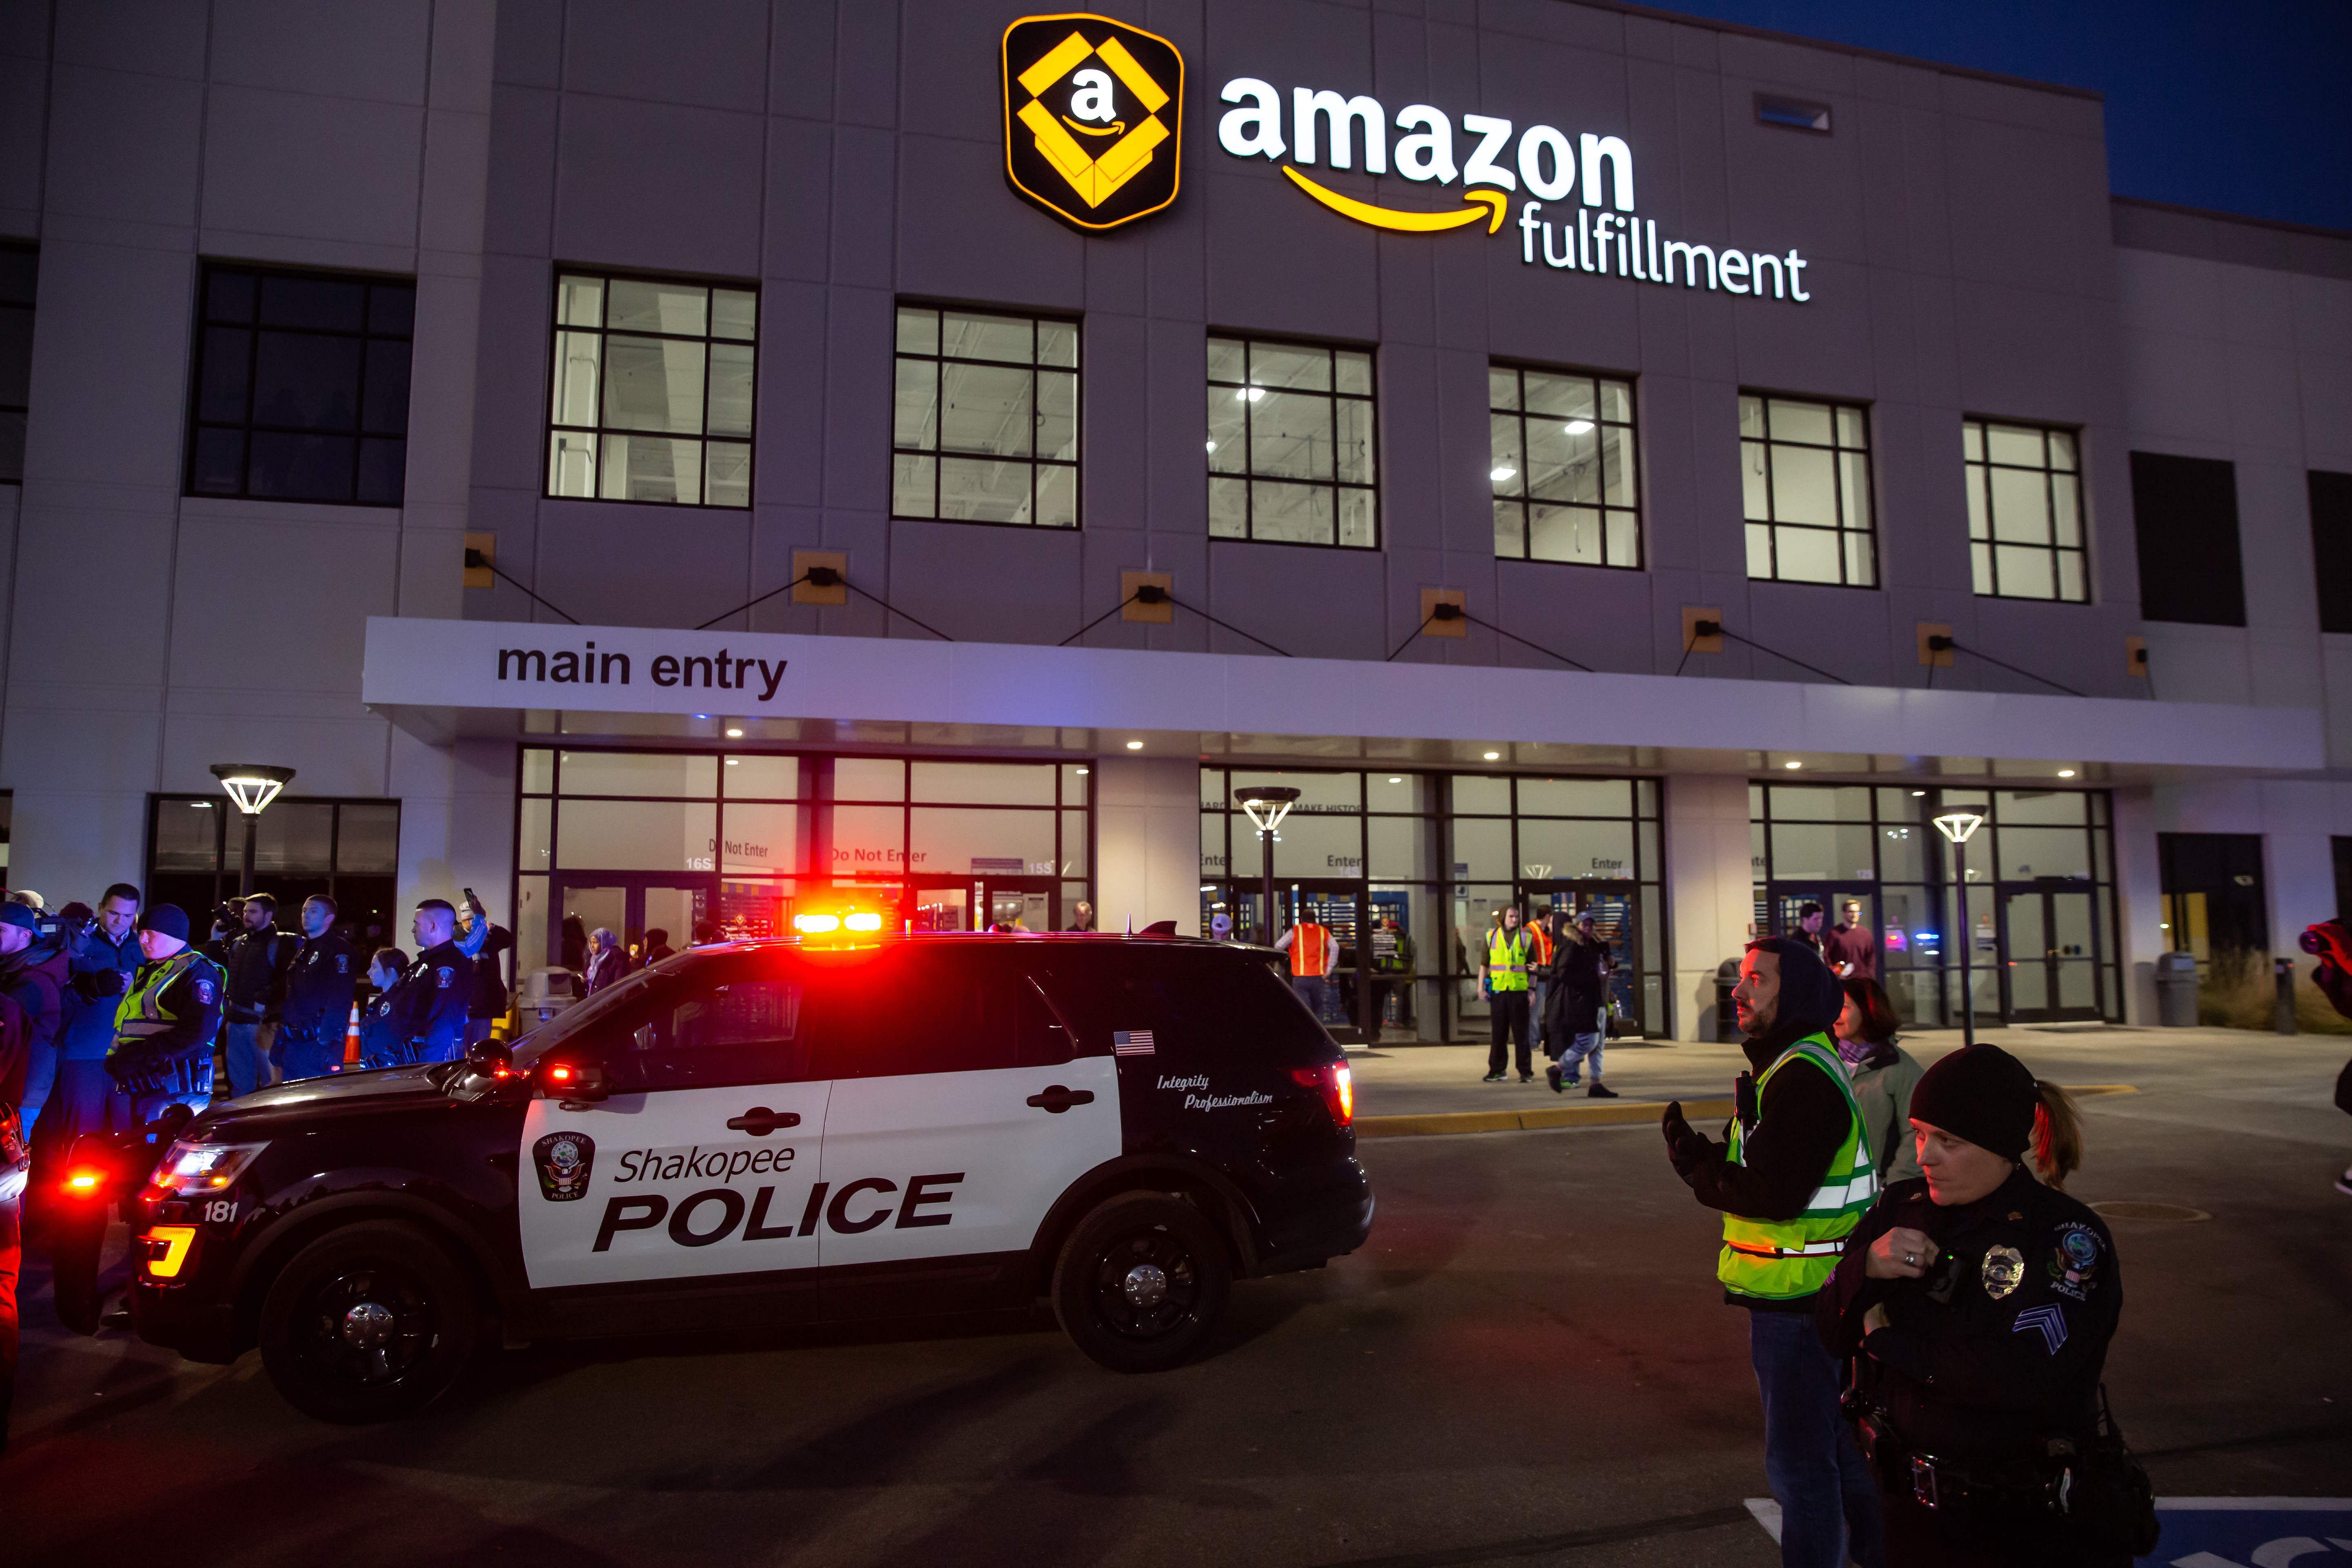 Amazon on Wednesday announced a one-year ban on letting police use its facial recognition technology, calling for strong government regulations for its ethical use. Credit: AFP Photo